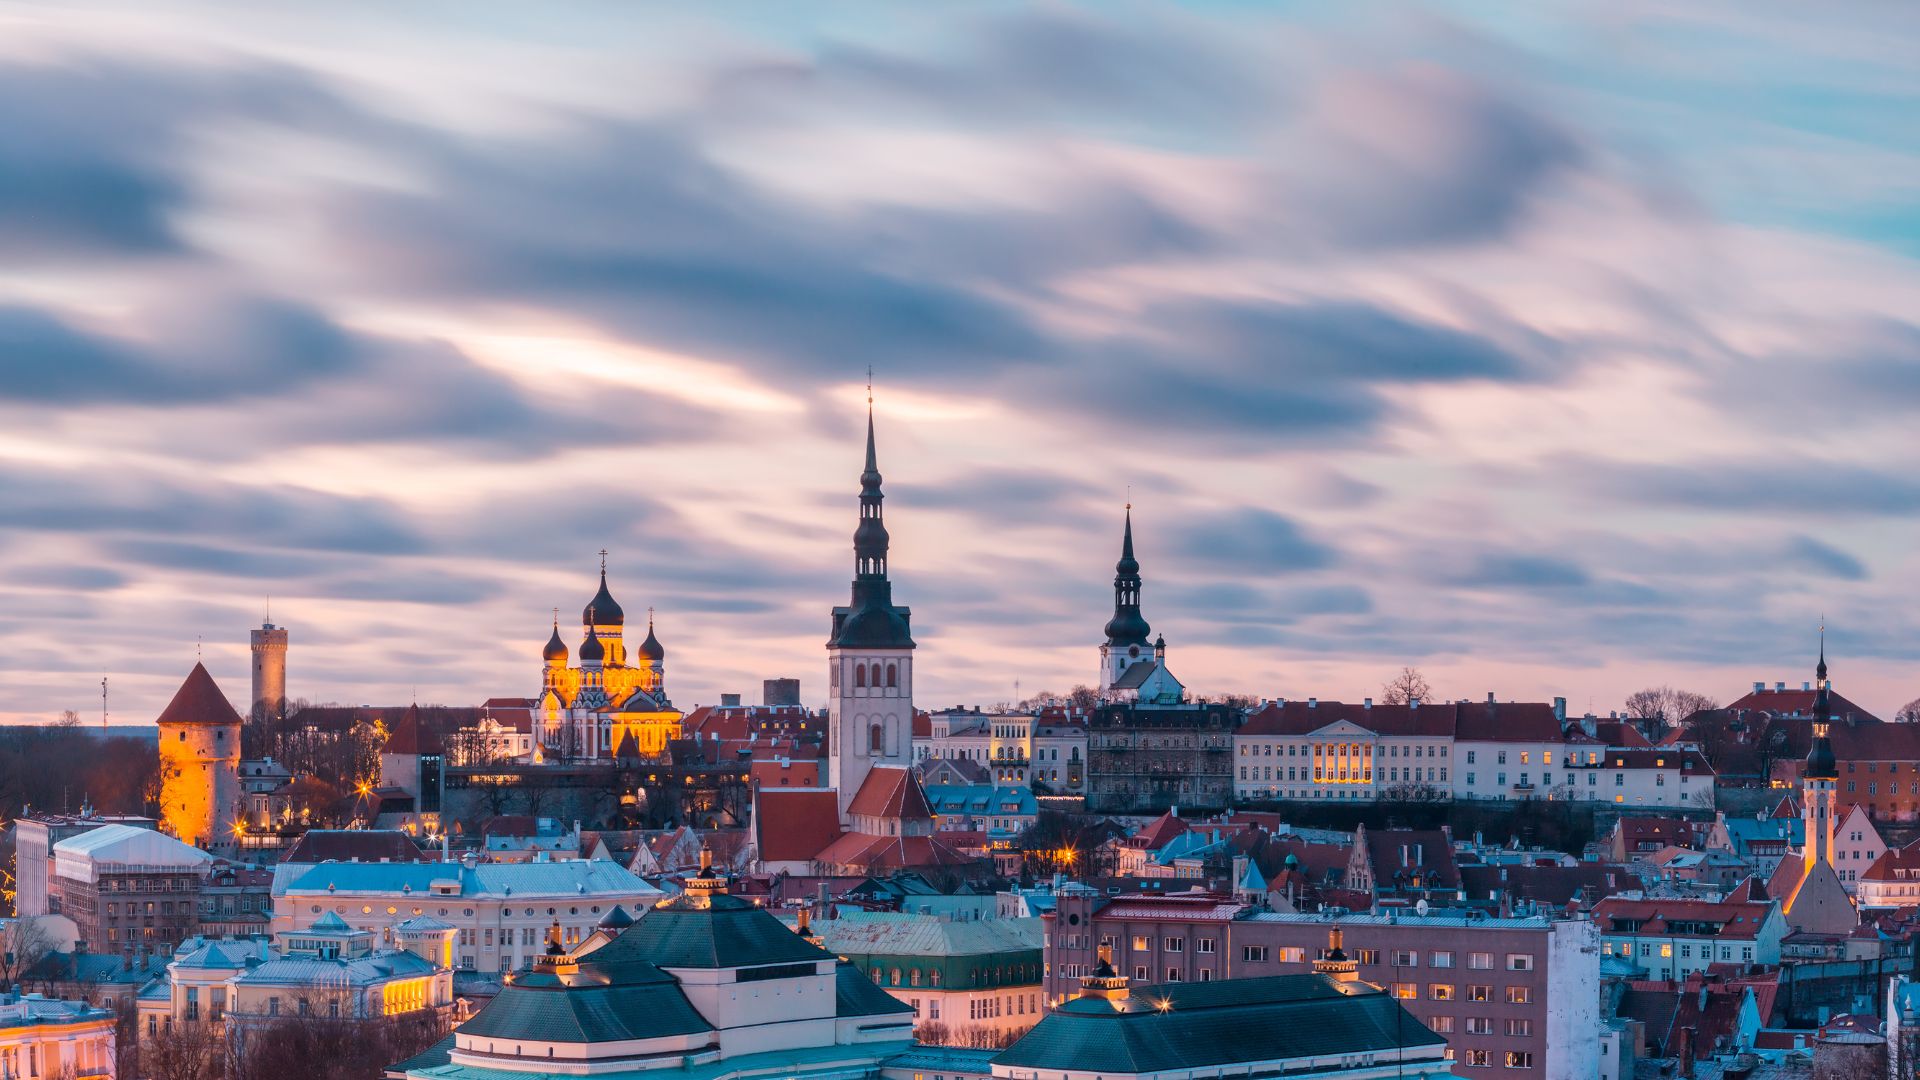 Obtaining license for investment firm in Estonia